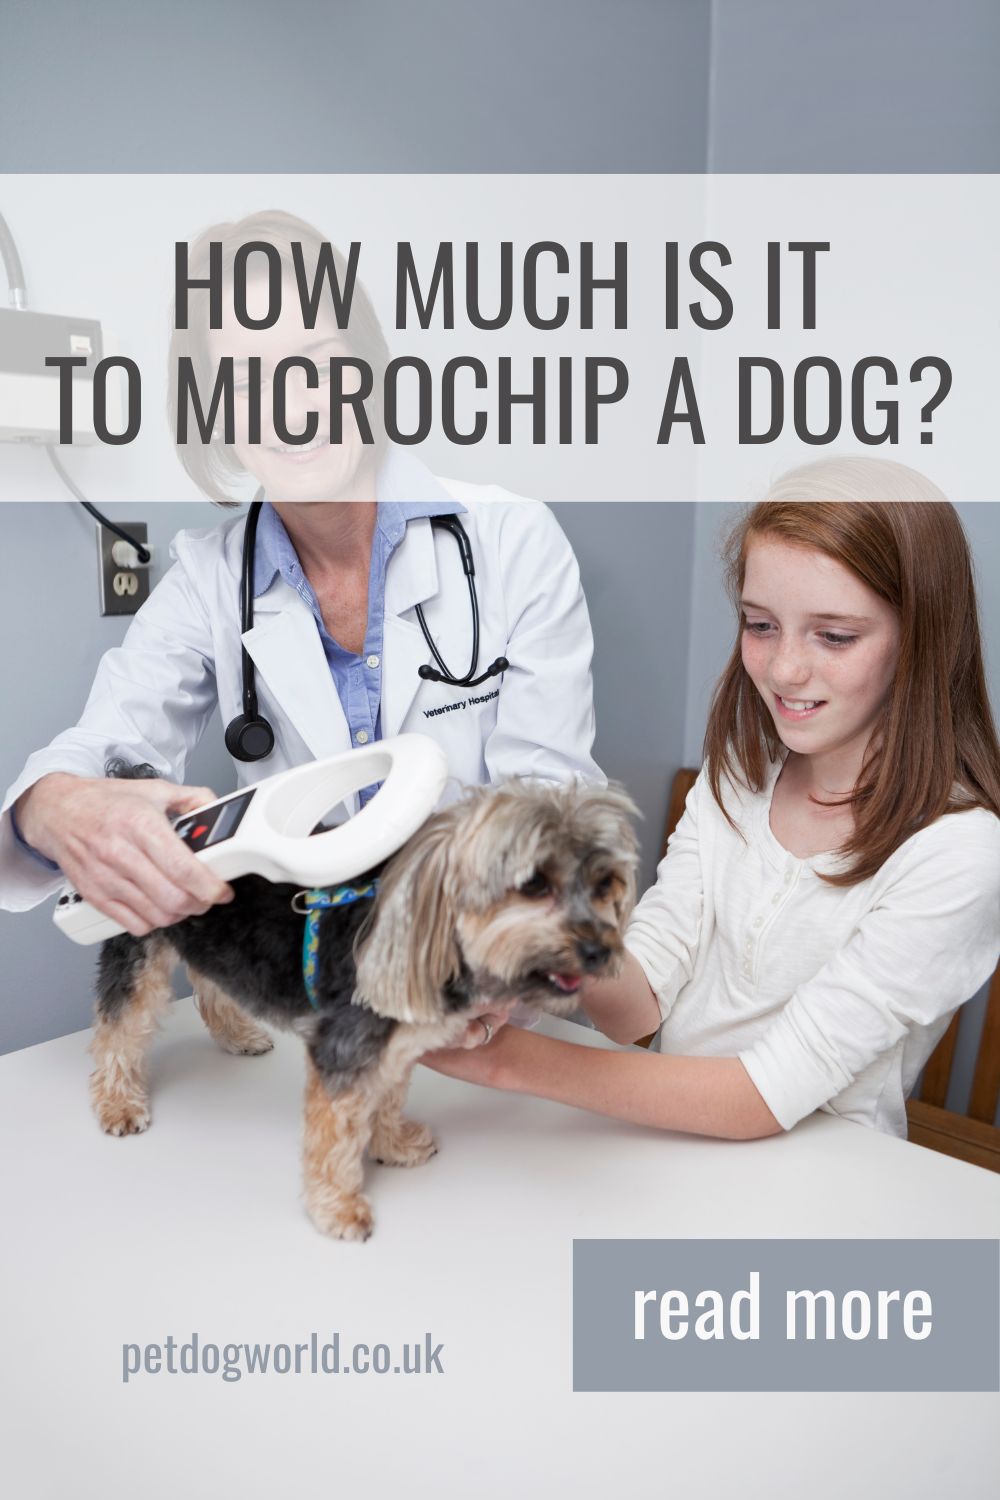 Discover the costs and benefits of microchipping your dog in the UK. Ensure your pet's safety, comply with UK law, and gain peace of mind.